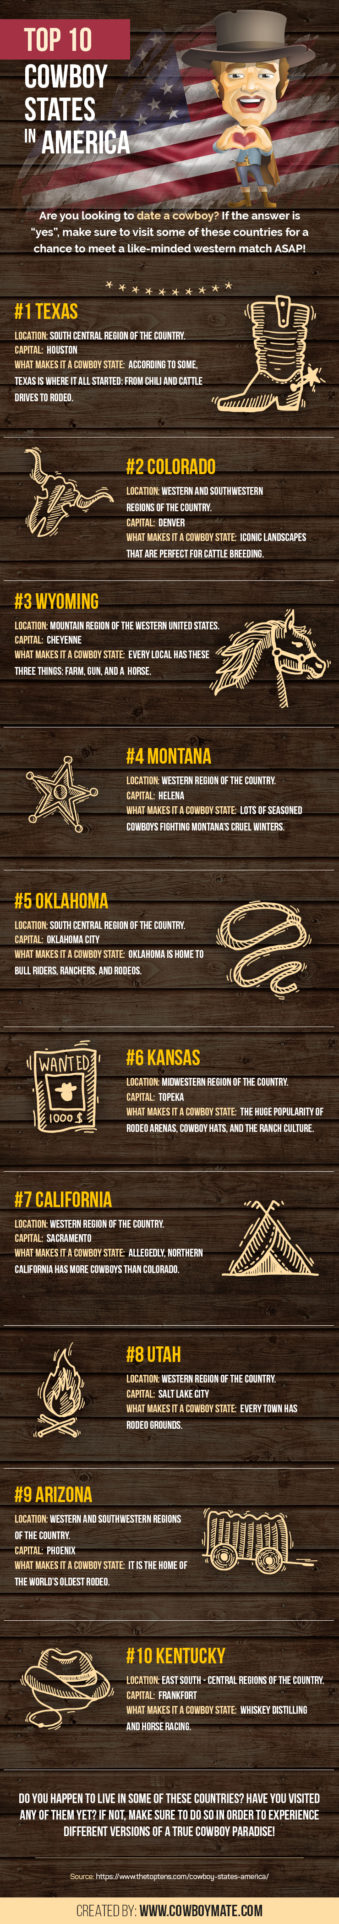 Top 10 Cowboy States in America